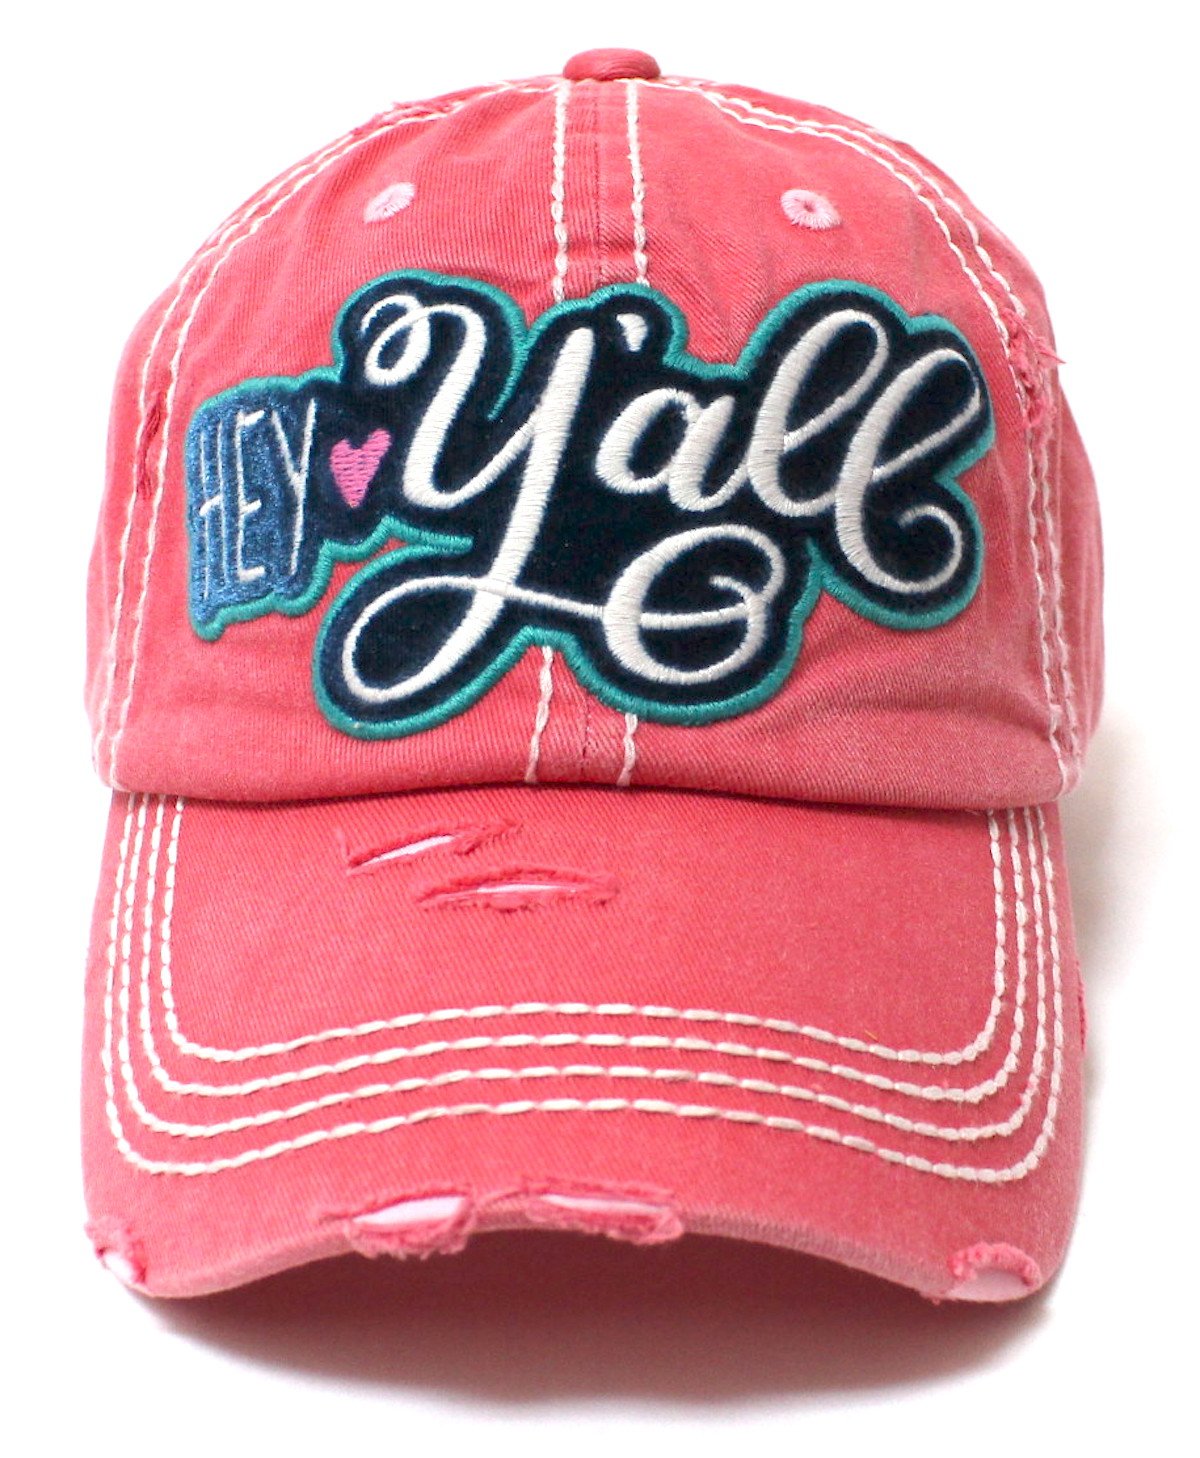 Y'ALL COLLECTION – Caps 'N Vintage